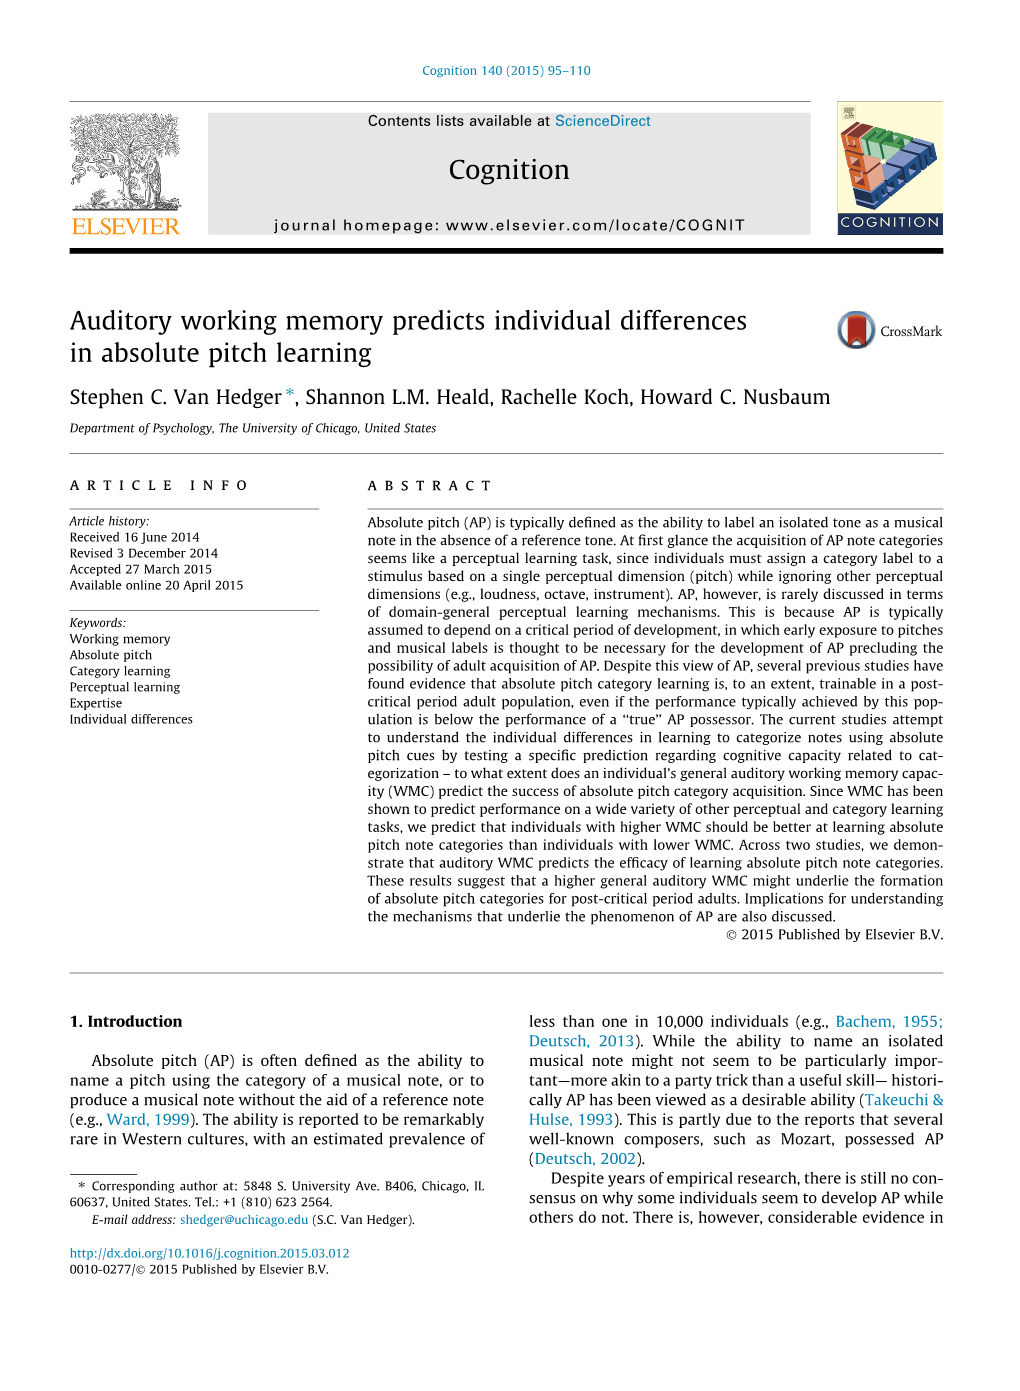 Auditory Working Memory Predicts Individual Differences in Absolute Pitch Learning ⇑ Stephen C